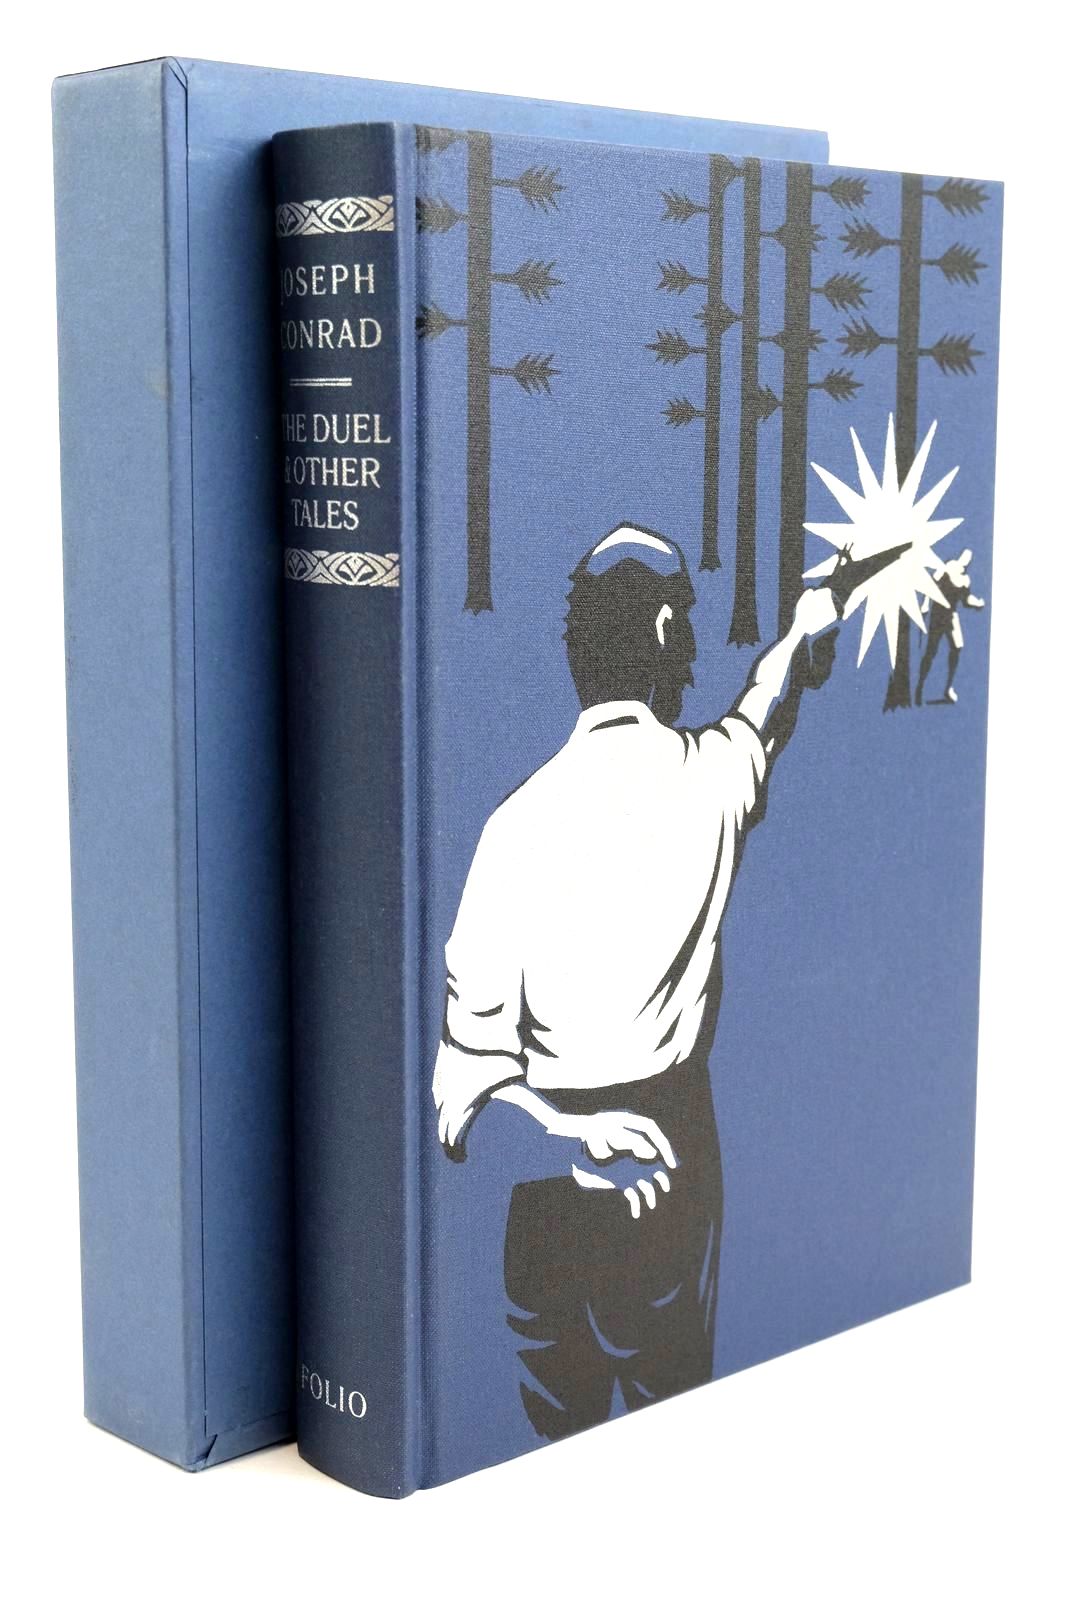 Photo of THE DUEL AND OTHER TALES written by Conrad, Joseph illustrated by Mosley, Francis published by Folio Society (STOCK CODE: 1320465)  for sale by Stella & Rose's Books